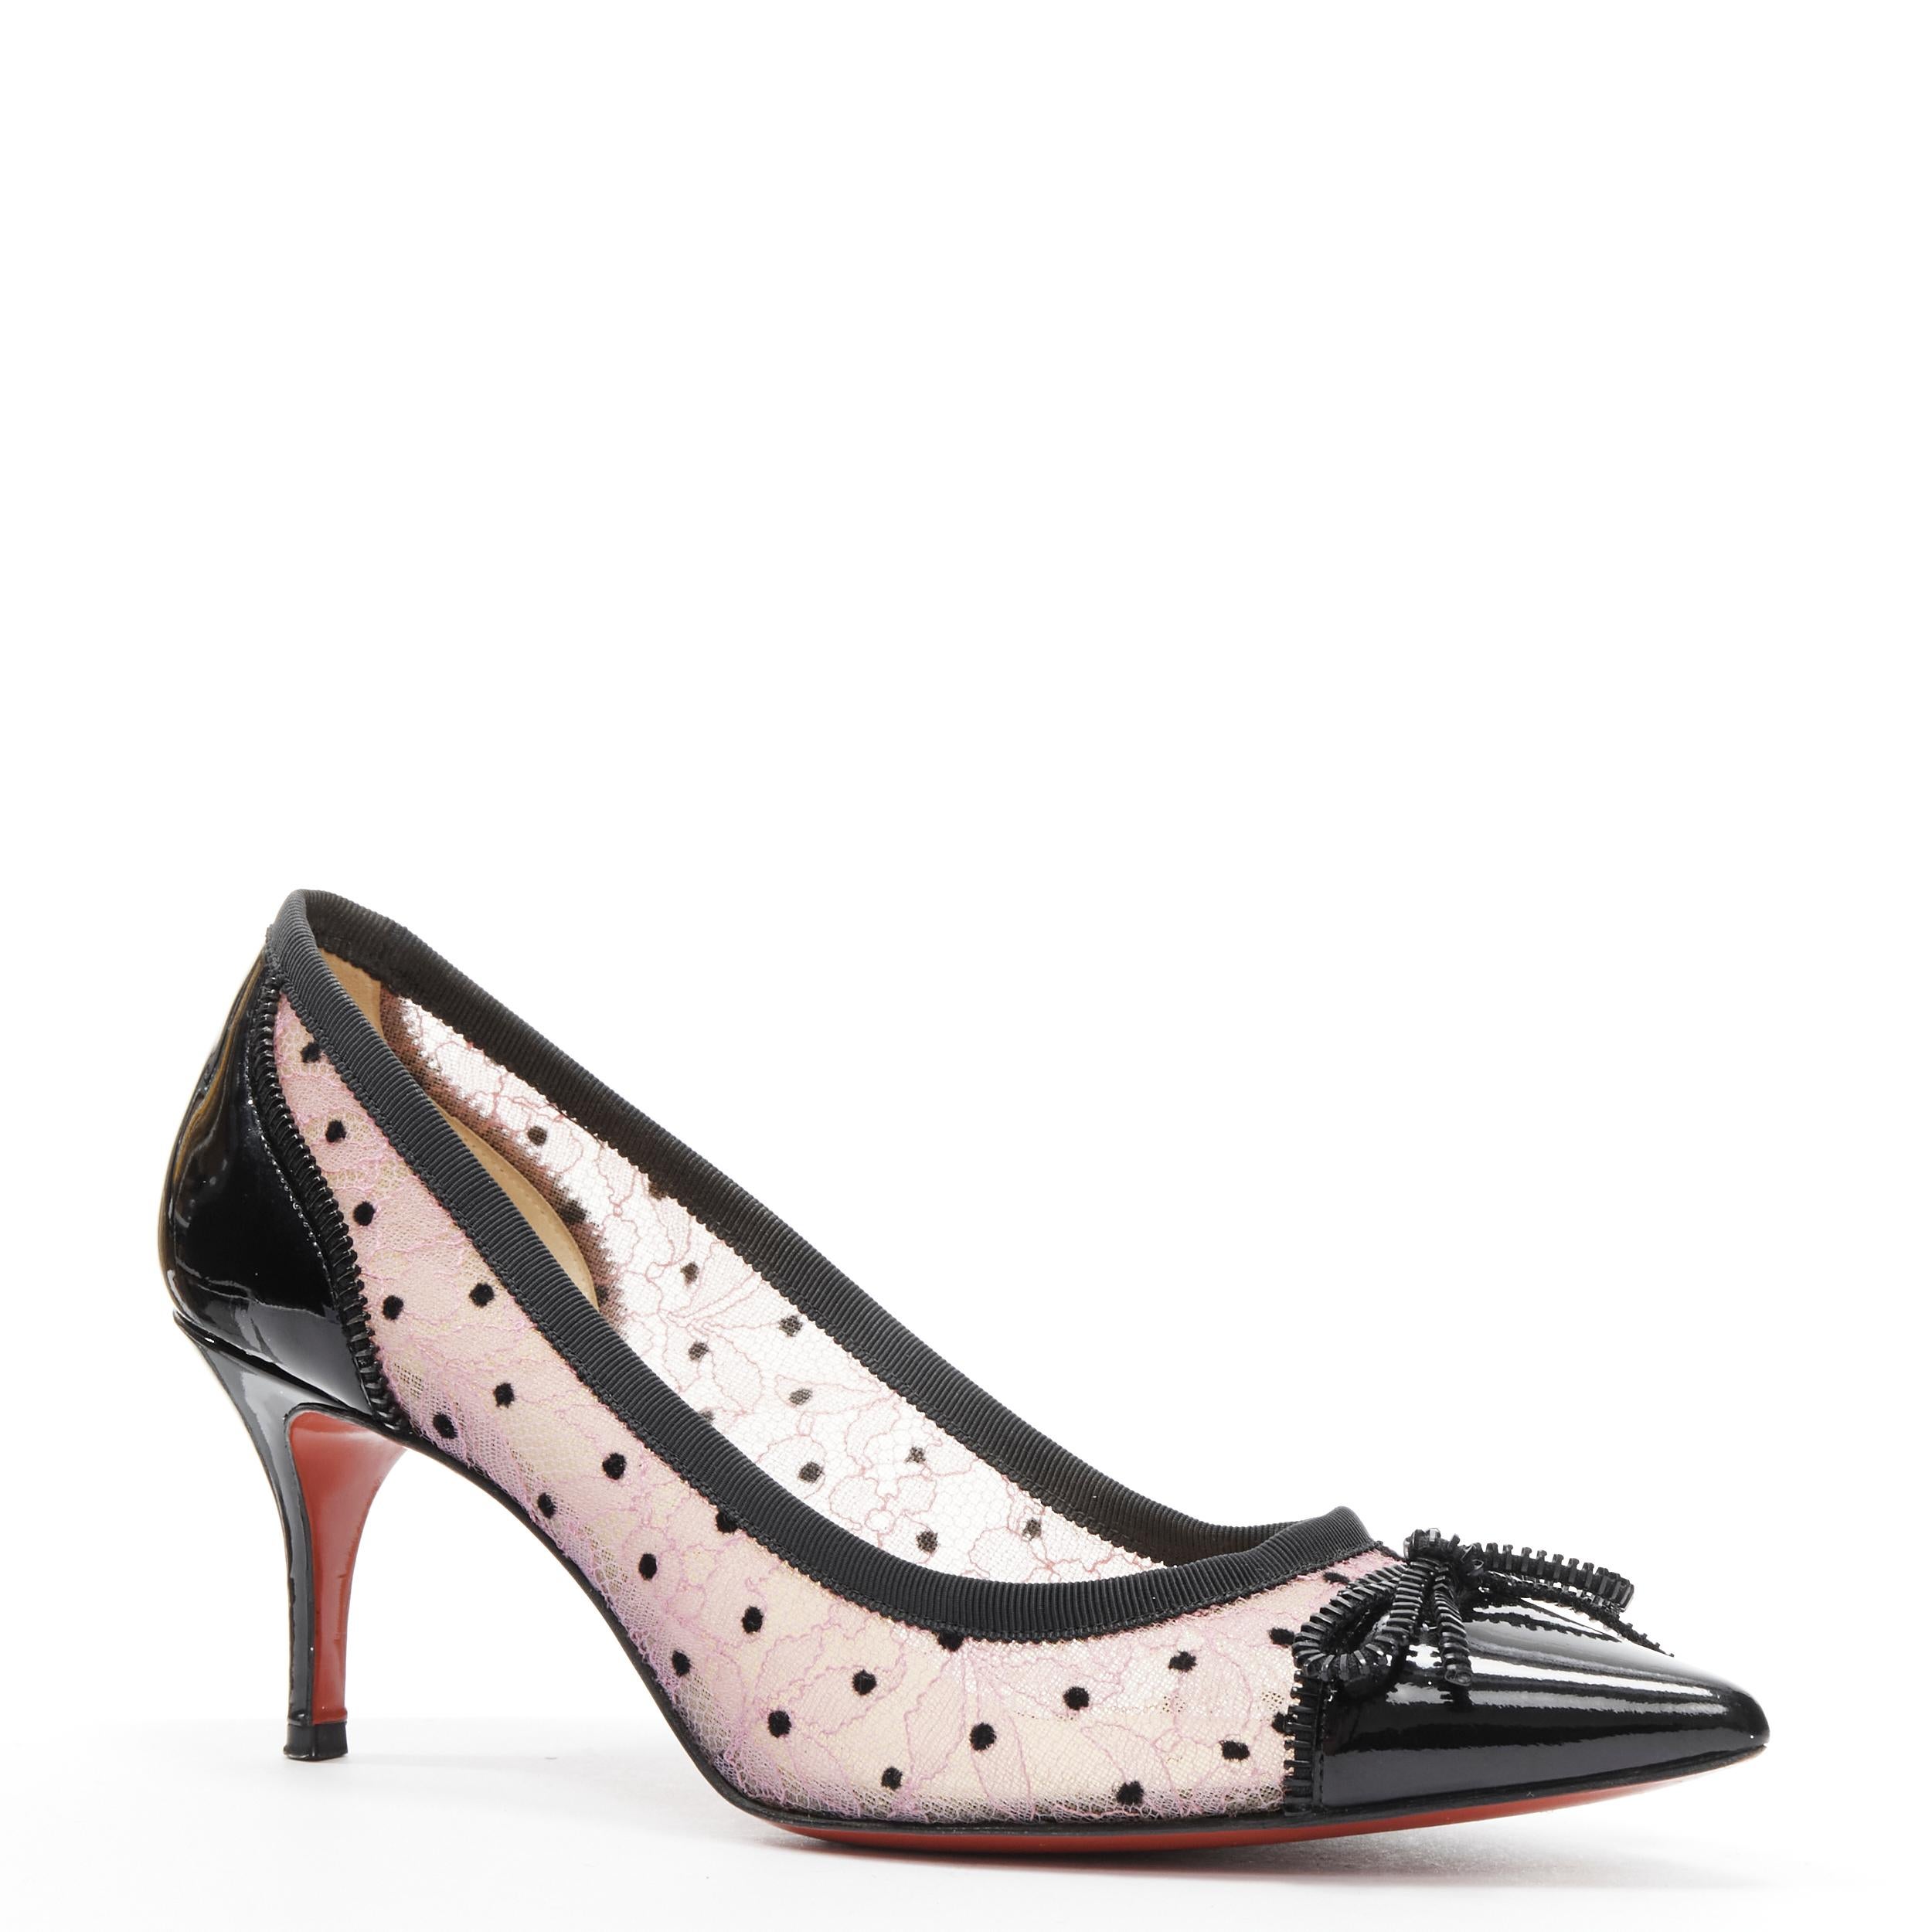 CHRISITIAN LOUBOUTIN Souris 70 pink lace polka dot toe cap kitten heel EU37.5 
Reference: TGAS/B01859 
Brand: Christian Louboutin 
Model: Souris 70 
Material: Patent Leather 
Color: Pink 
Pattern: Floral 
Extra Detail: Pink lace with velvet polka